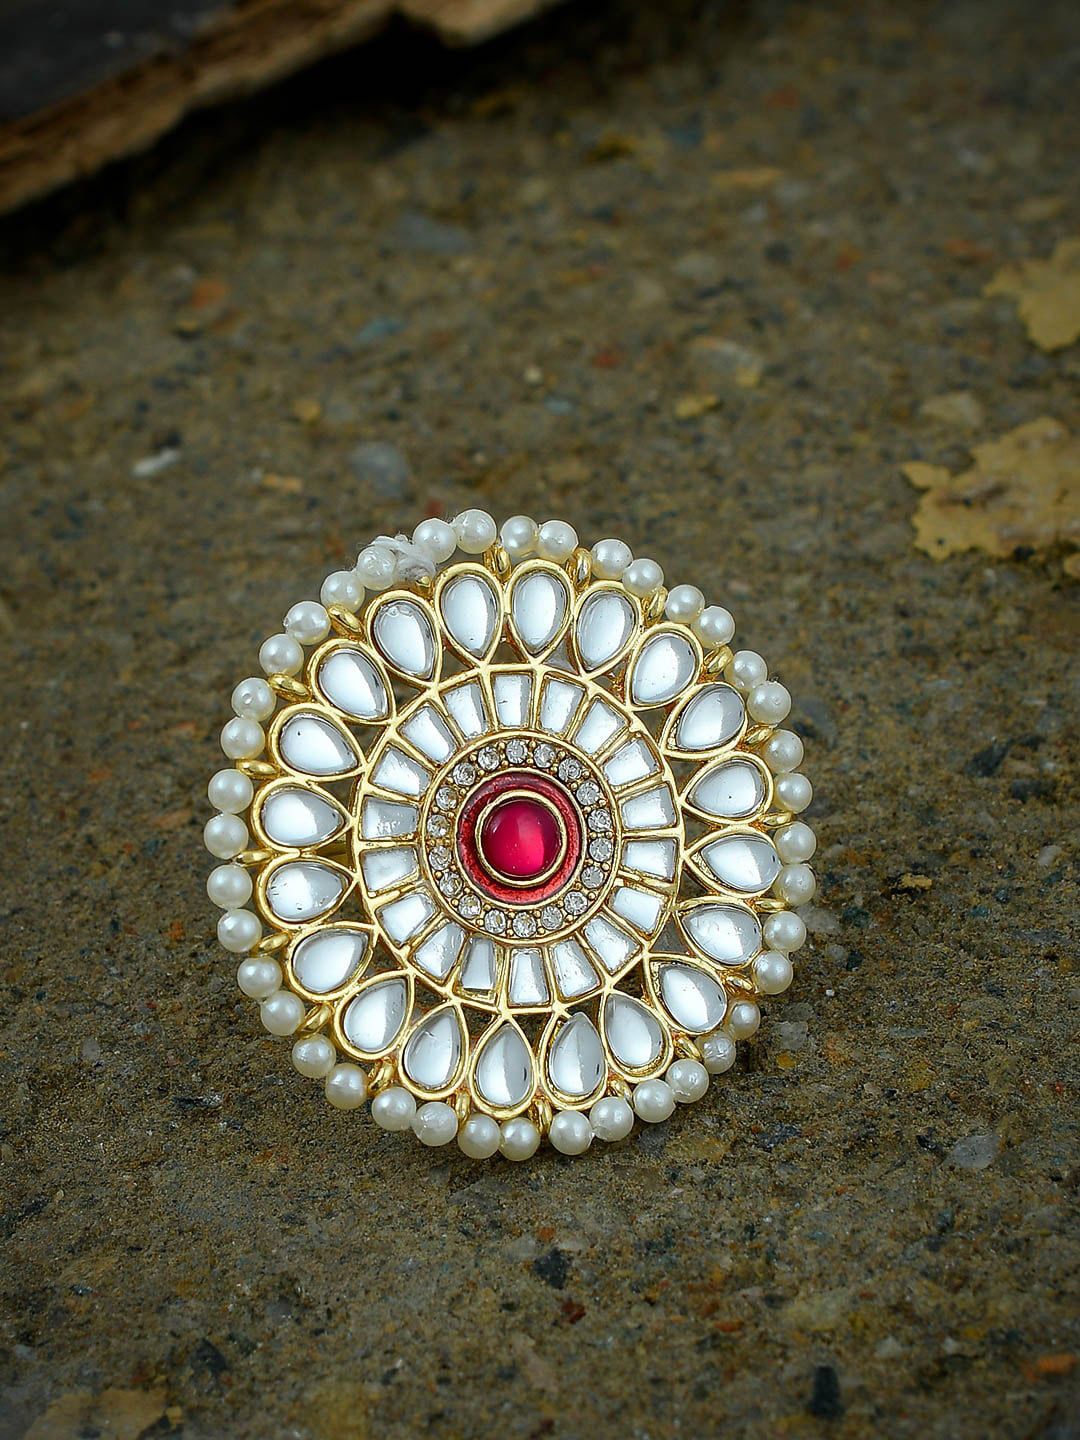 Silvermerc Designs Gold-Plated White & Red Kundan-Studded Beaded Meenakari Adjustable Statement Finger Ring Price in India